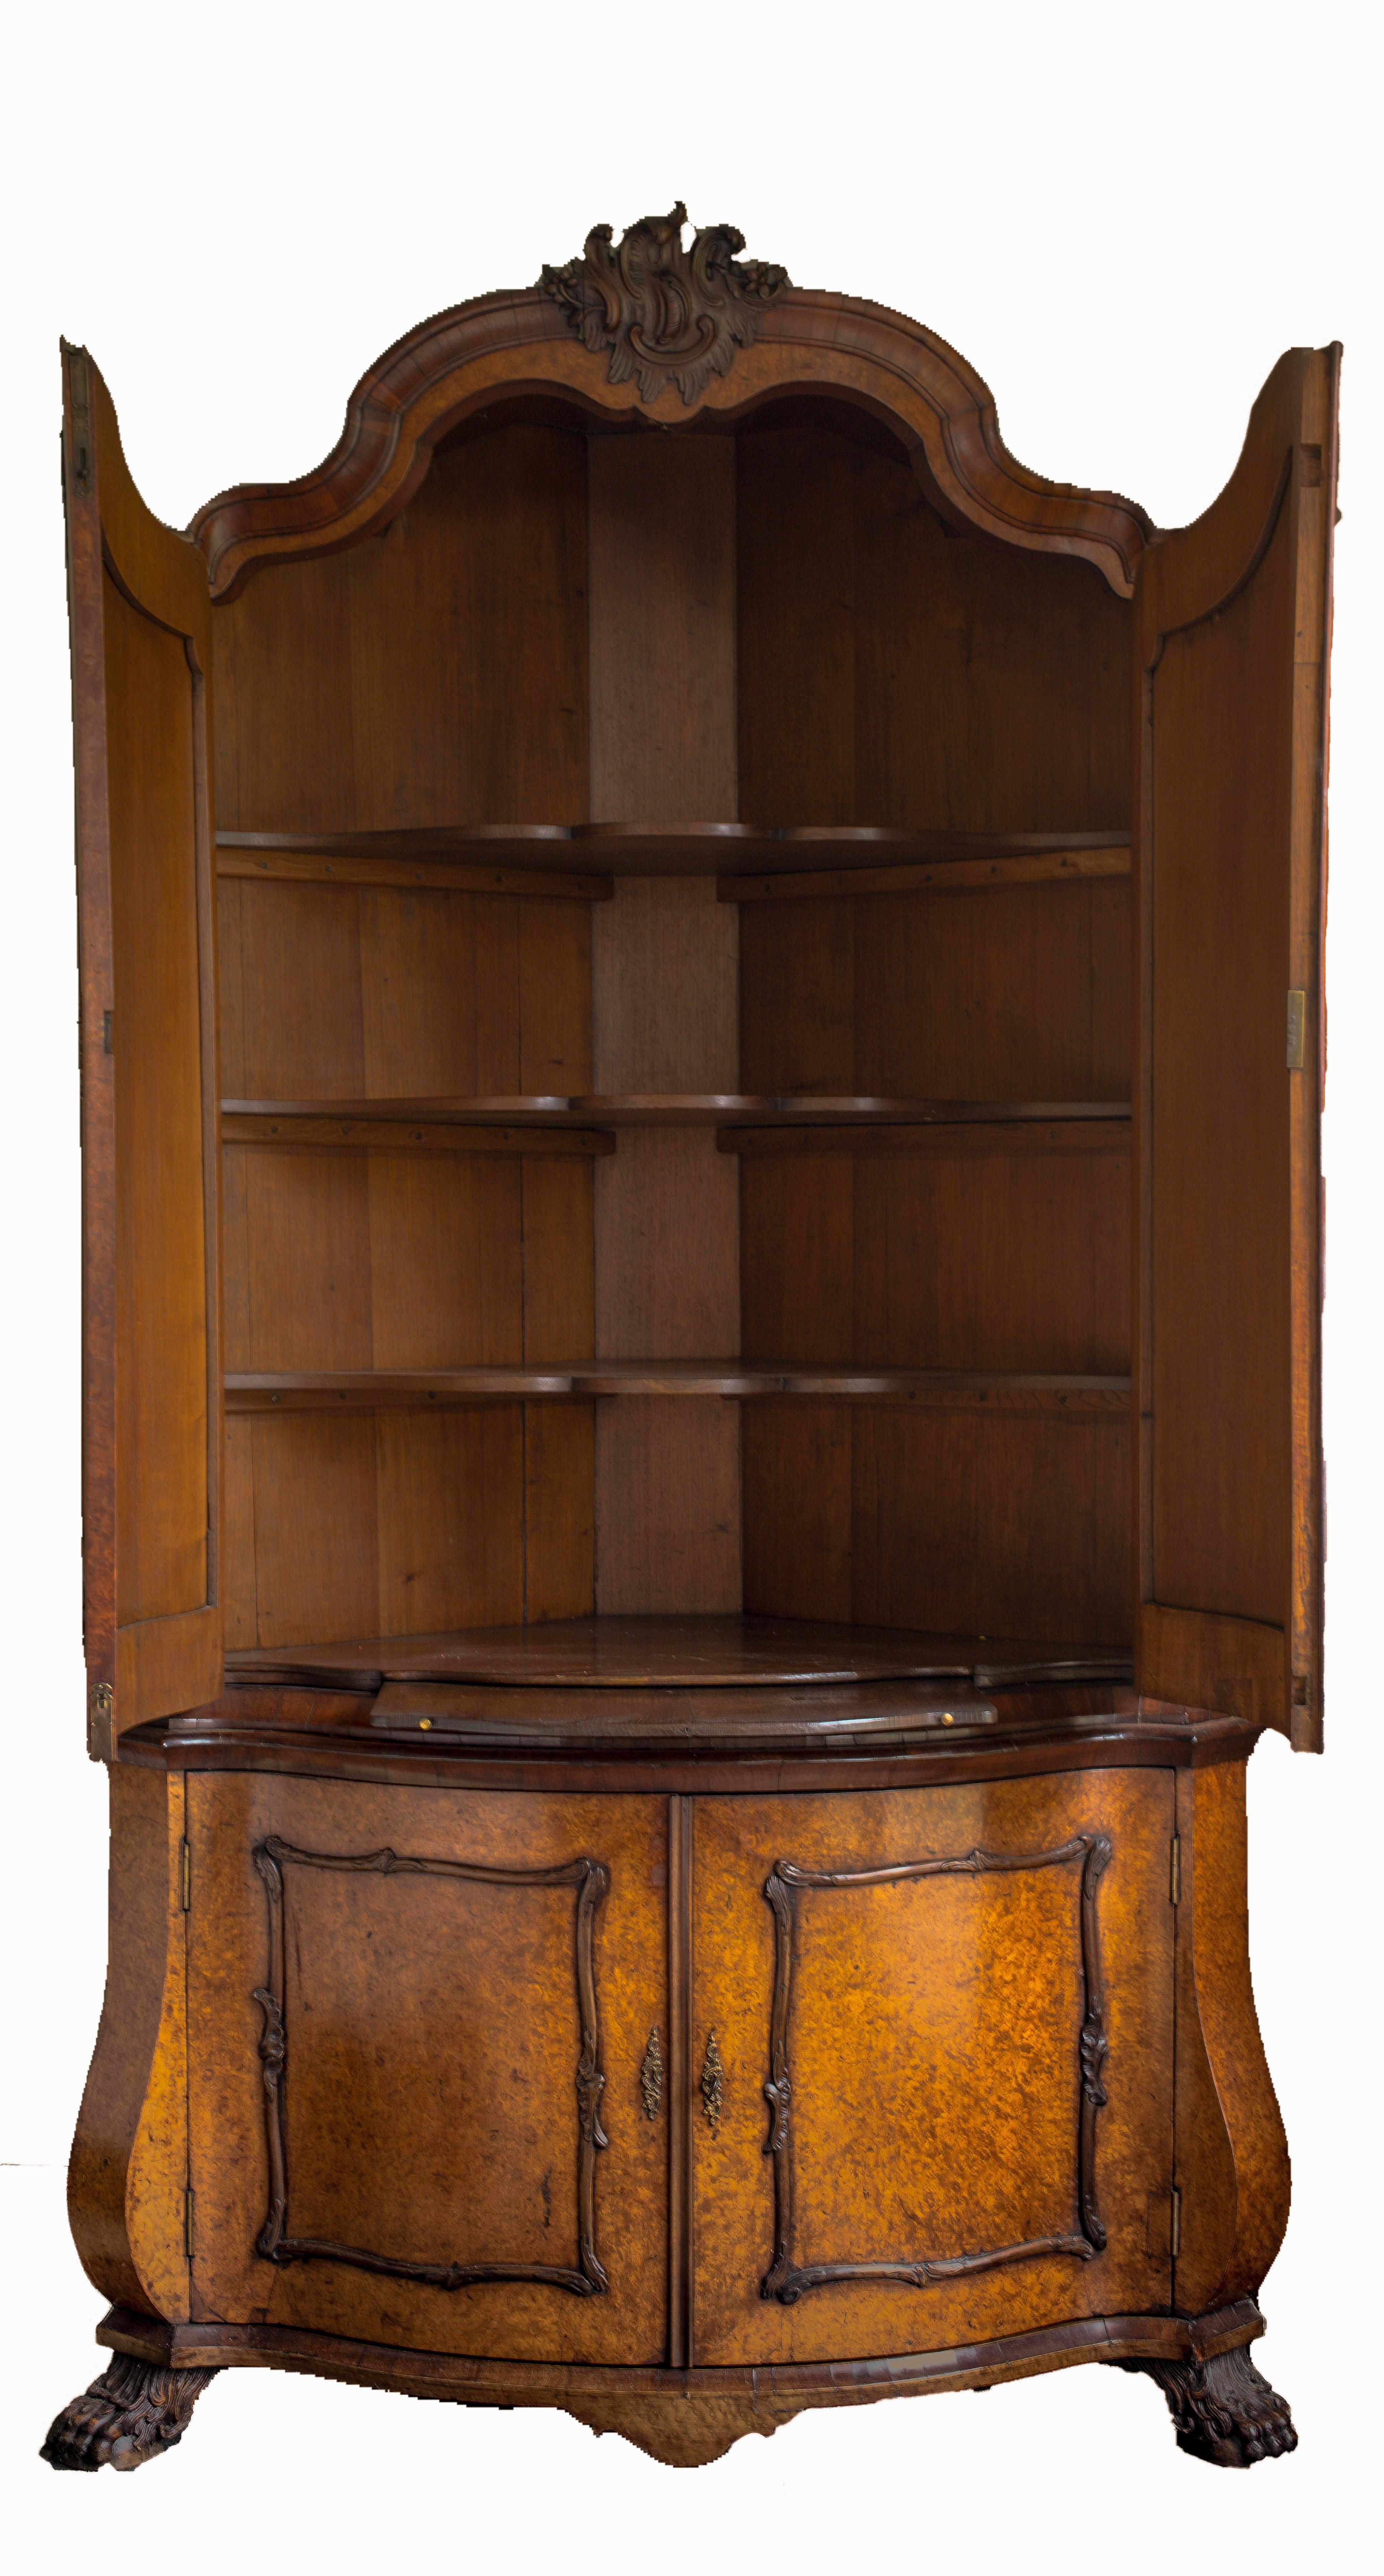 A Dutch Rococo amboyna burl, walnut-burr and walnut veneer bow-fronted corner buffet cabinet, third quarter 18th century.
The arched moulded corniche decorated with four carved C-scrolls with rockwork and flower-heads.
Above a pair of arched